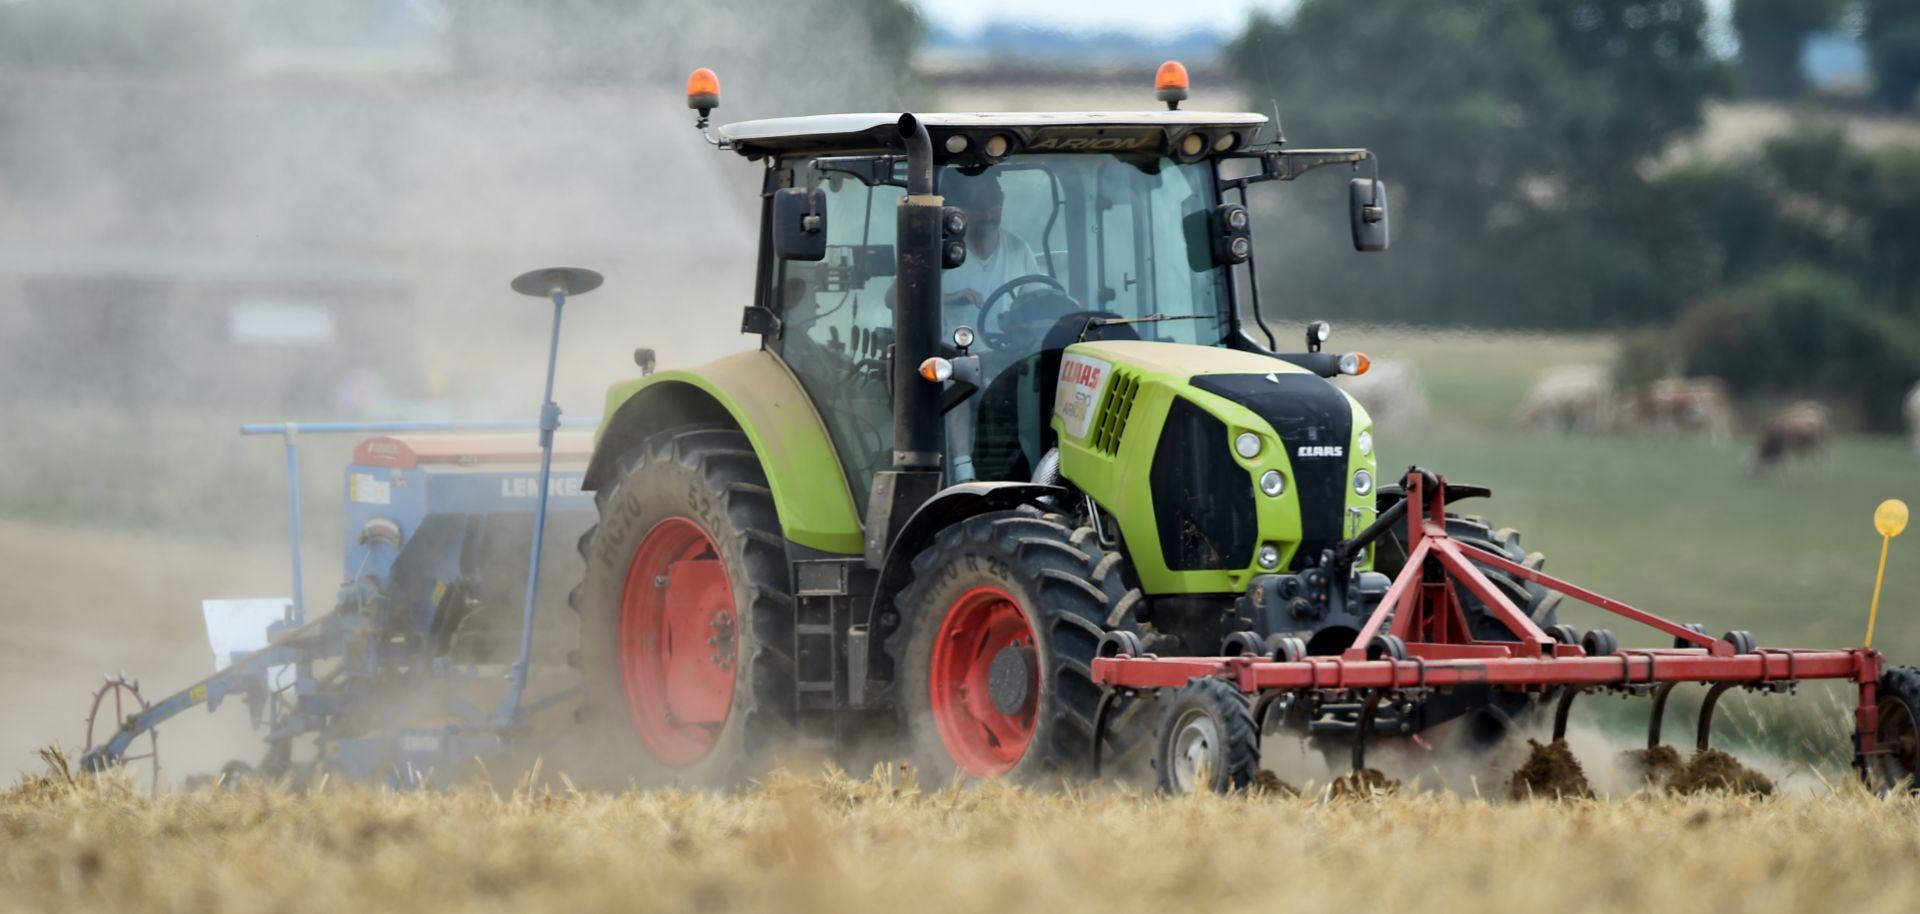 A farmer drives a tractor as he sows his field in a field near Bouloire north-western France on Aug. 21, 2018.